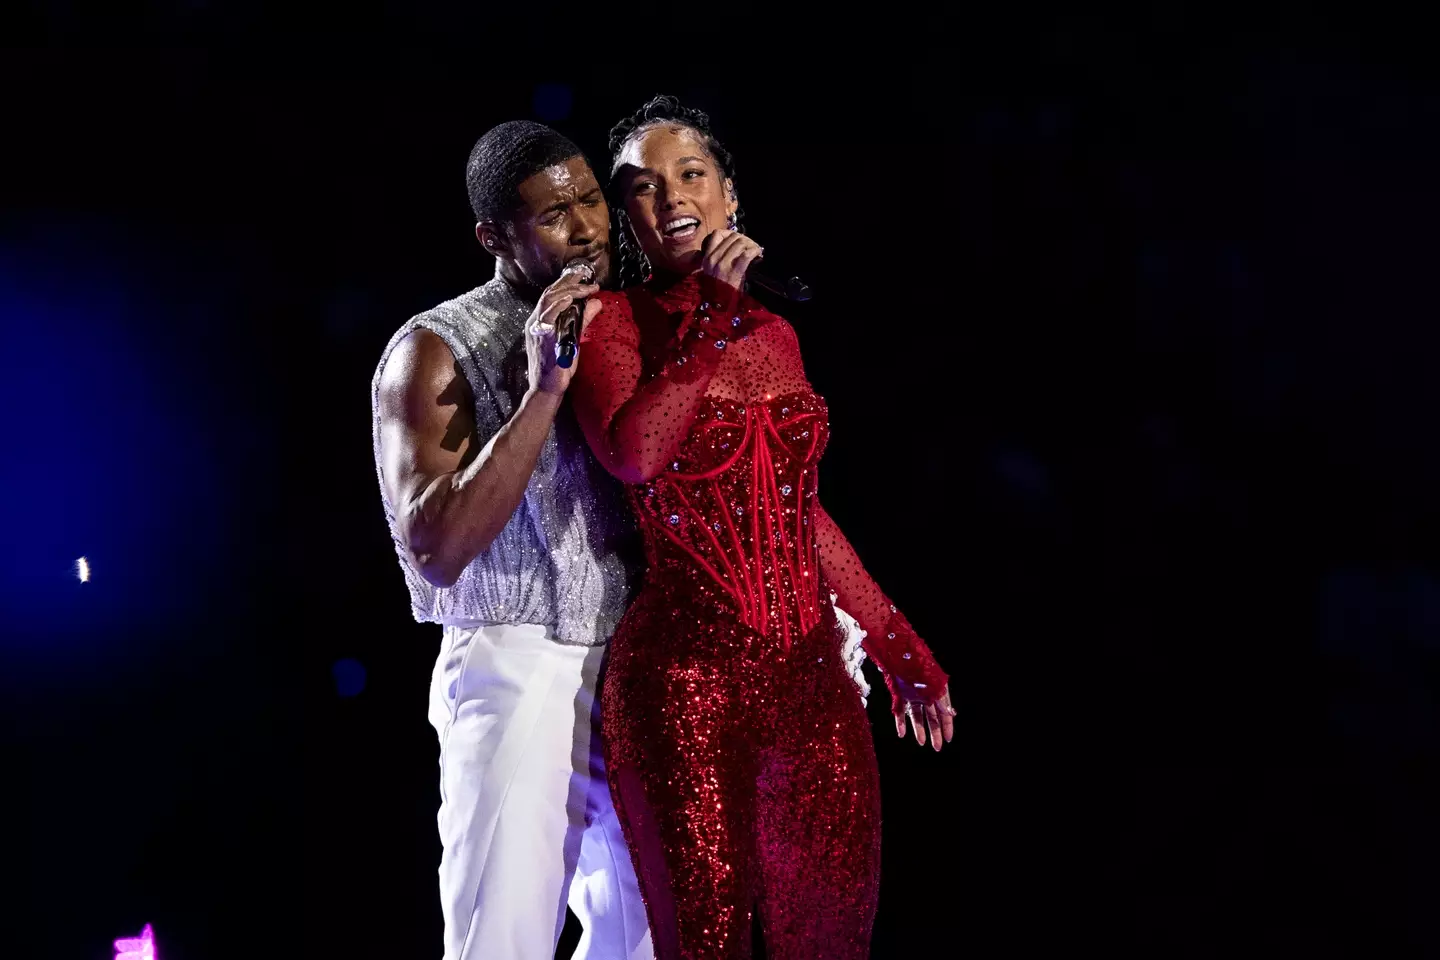 Usher and Alicia Keys performed at the Super Bowl.